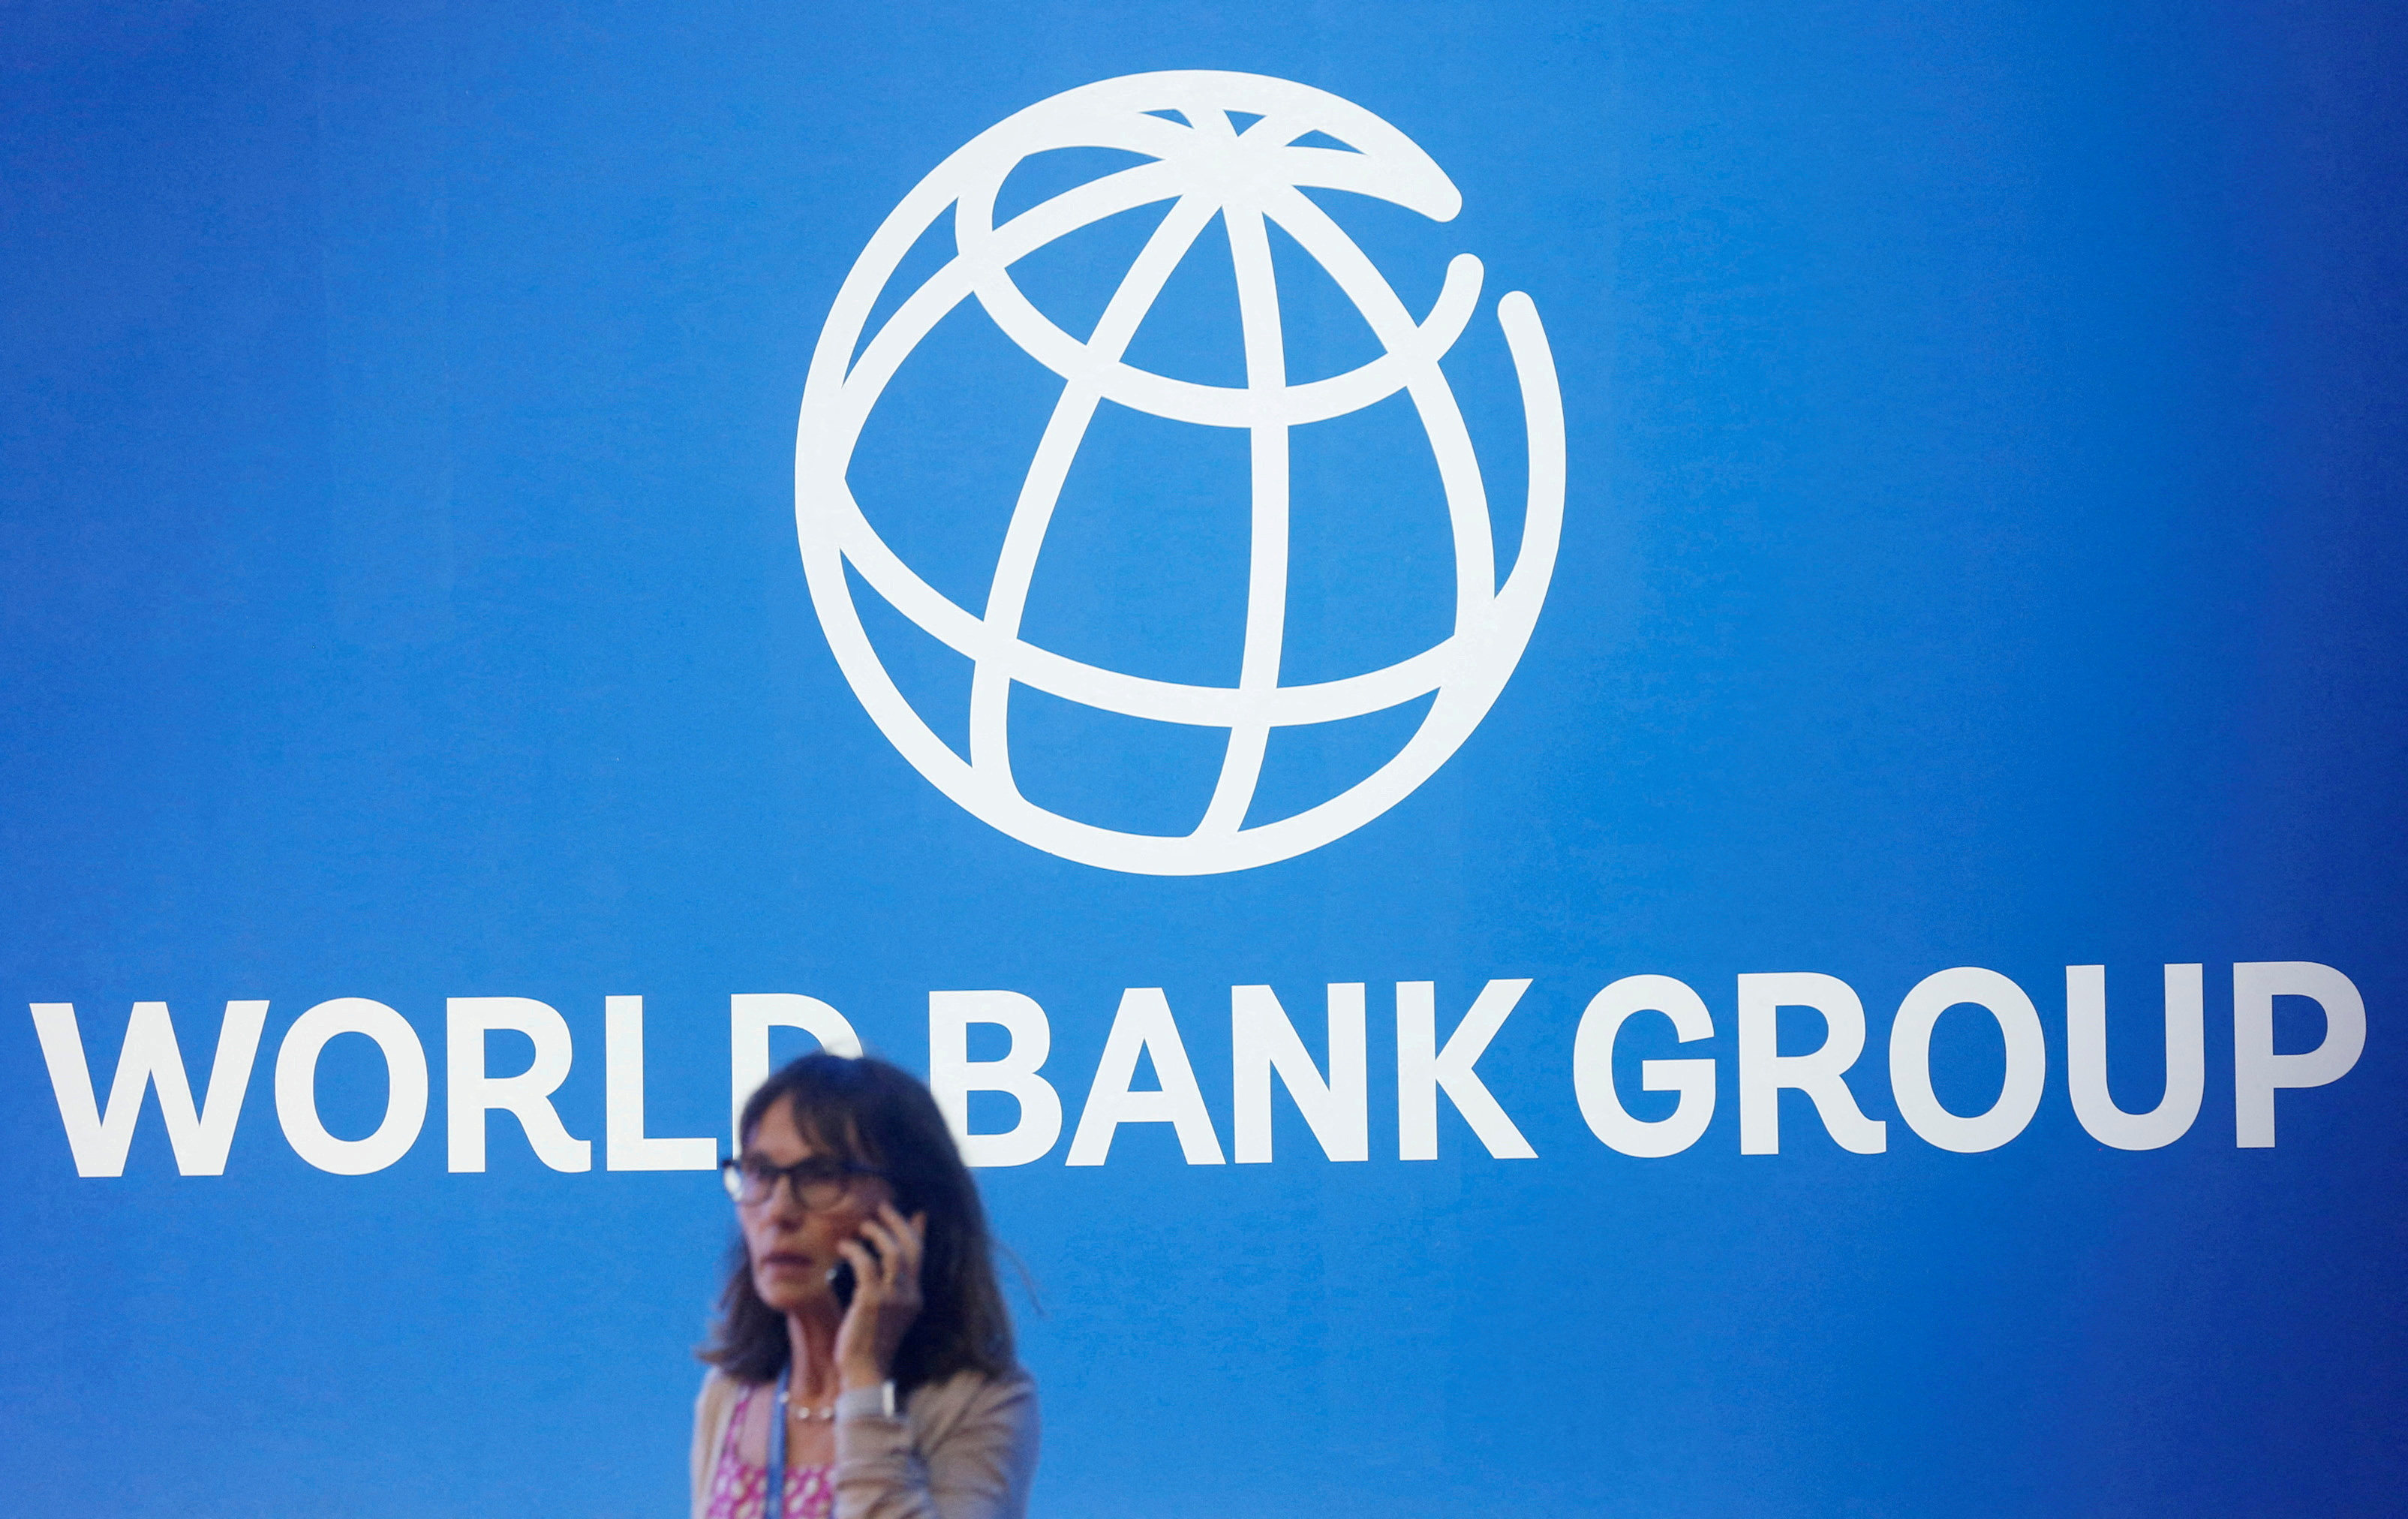 Multilateral development banks such as the World Bank have failed to keep pace with the changing needs of developing countries. They could as a start embrace a triple mandate by adding global public goods to their current goals of eliminating extreme poverty and boosting shared prosperity. Photo: Reuters